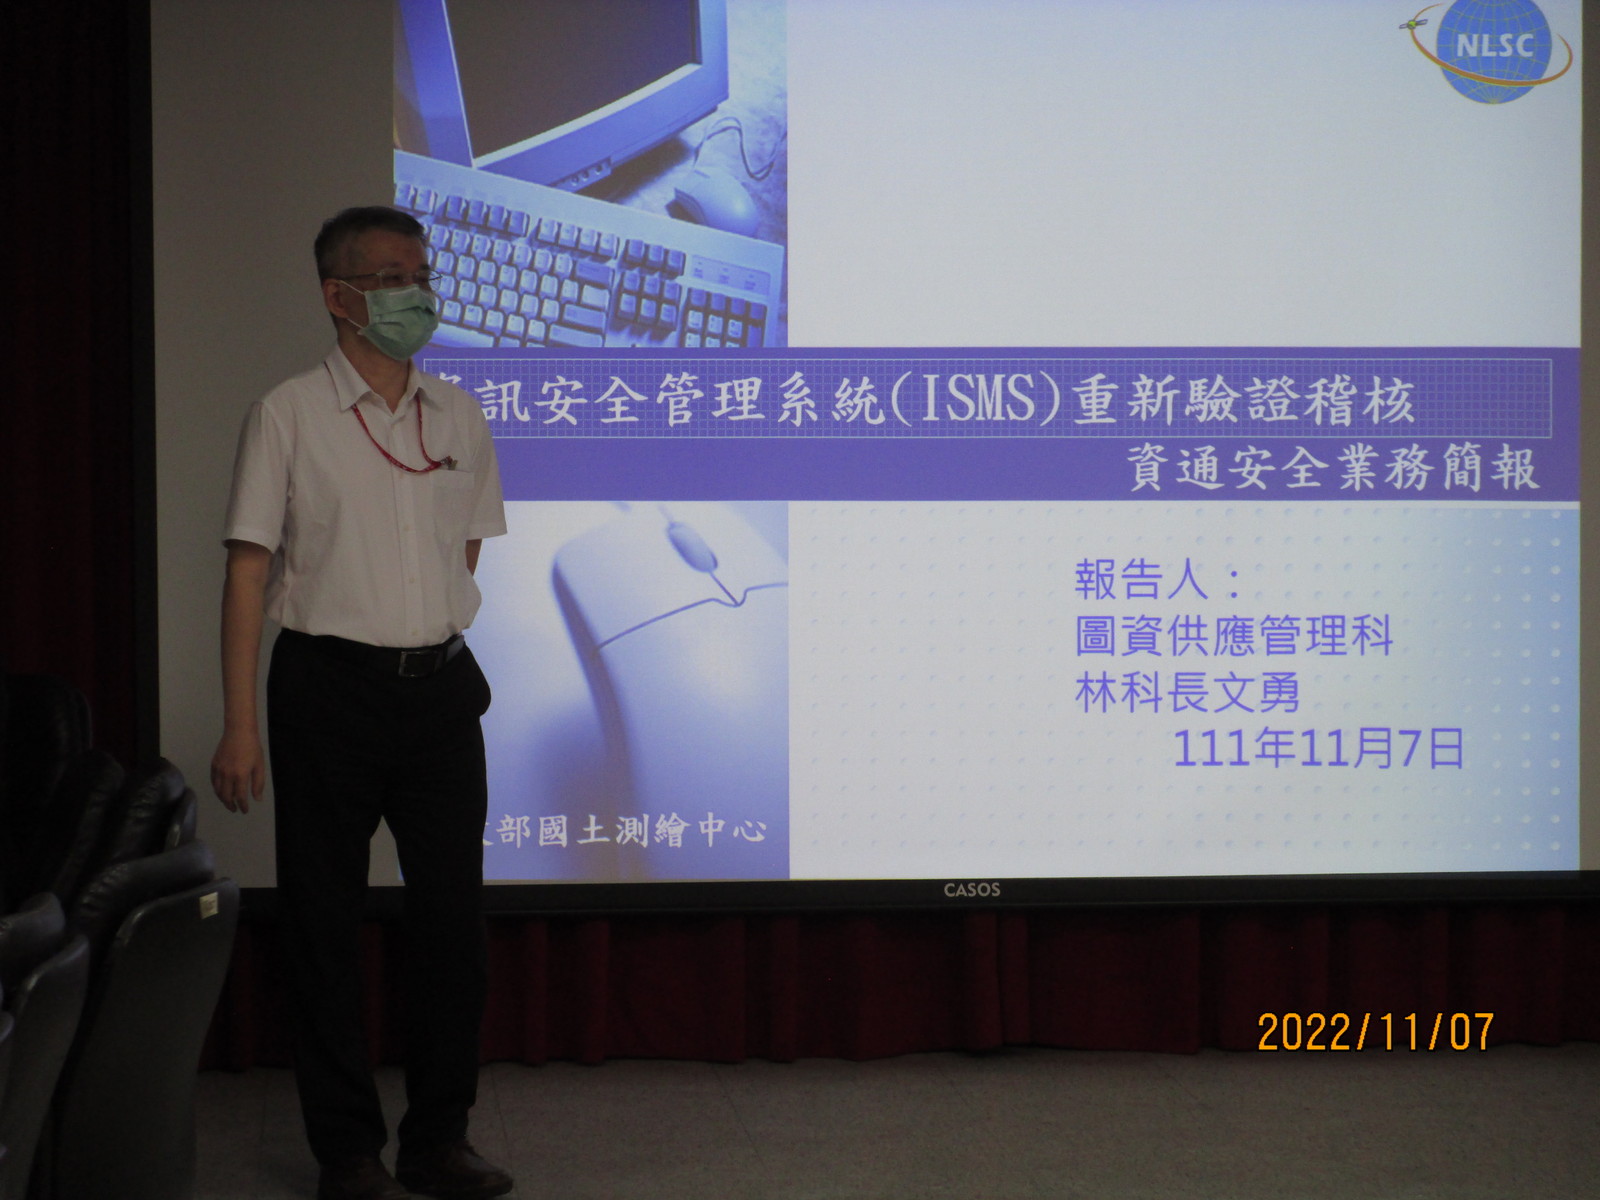 The presentation by the section chief, Lin, Wen-Yung, was the executive about the situation of ISMS.